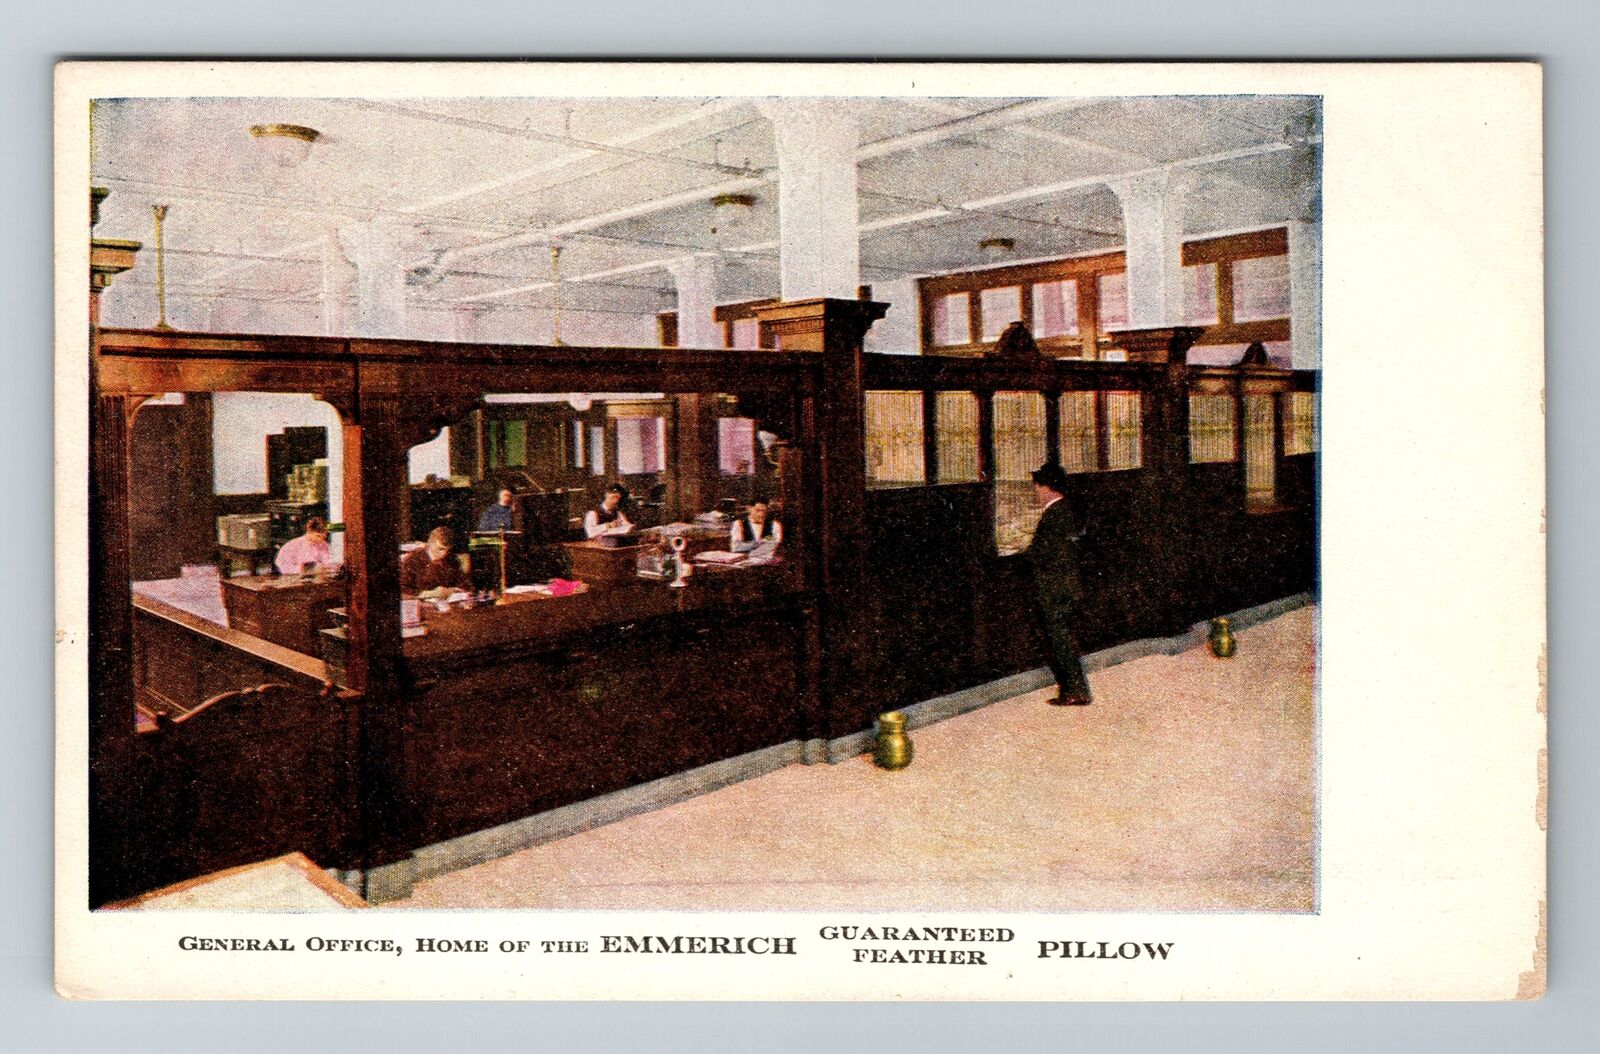 General Office, Home Of Emmerich Feather Pillow In Maine, Vintage Postcard